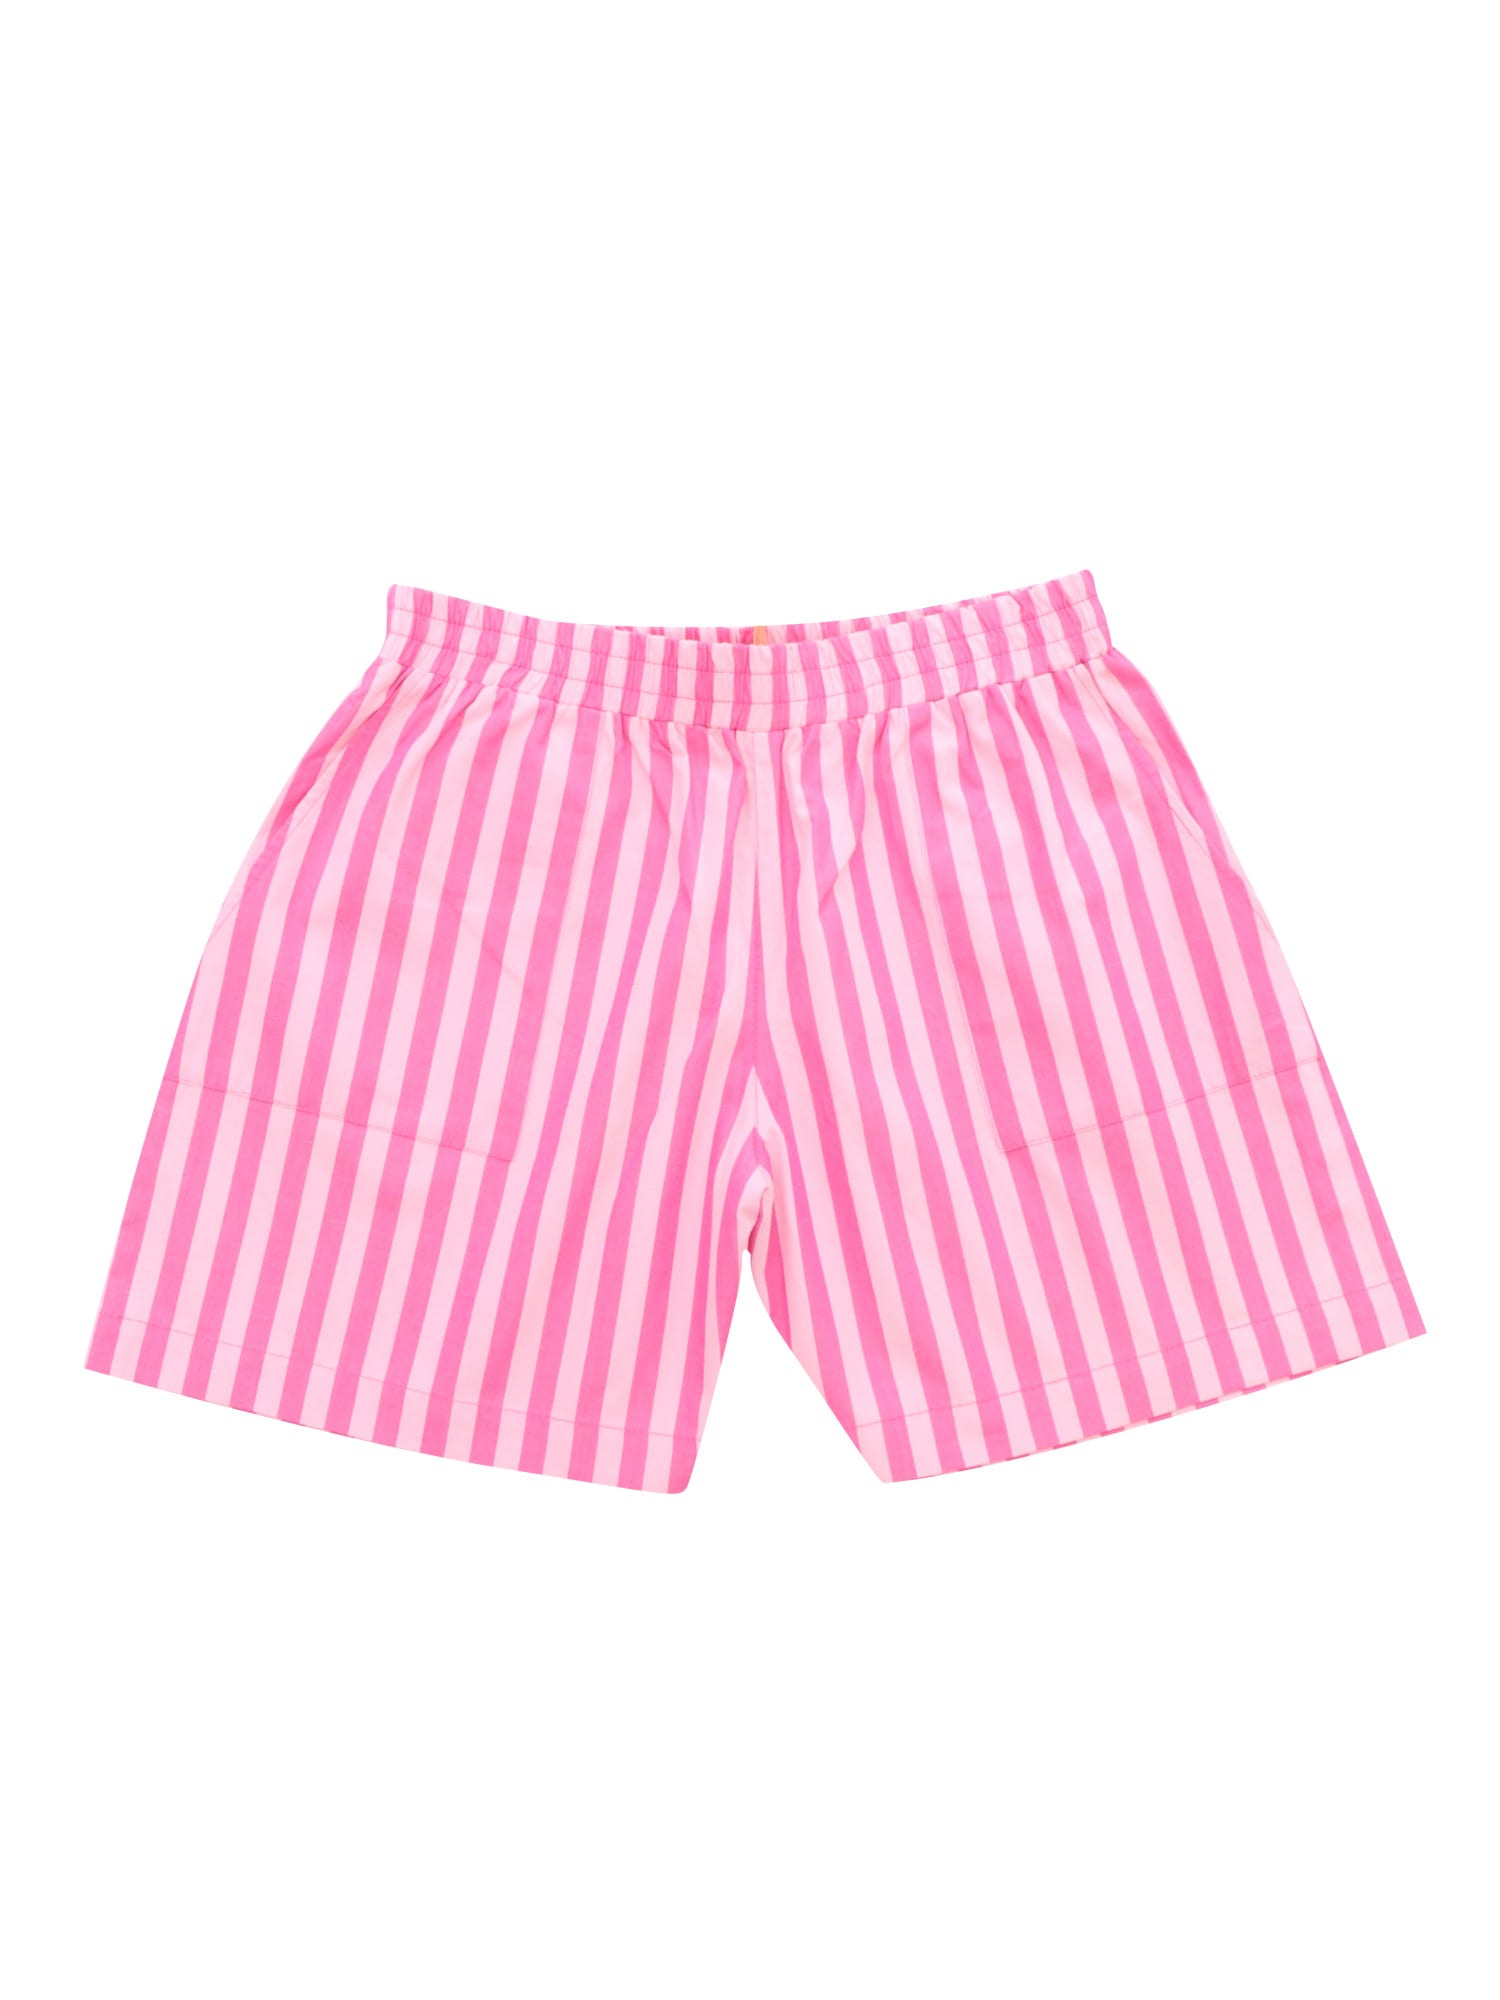 Max&amp;co. Kids' Pink Striped Shorts